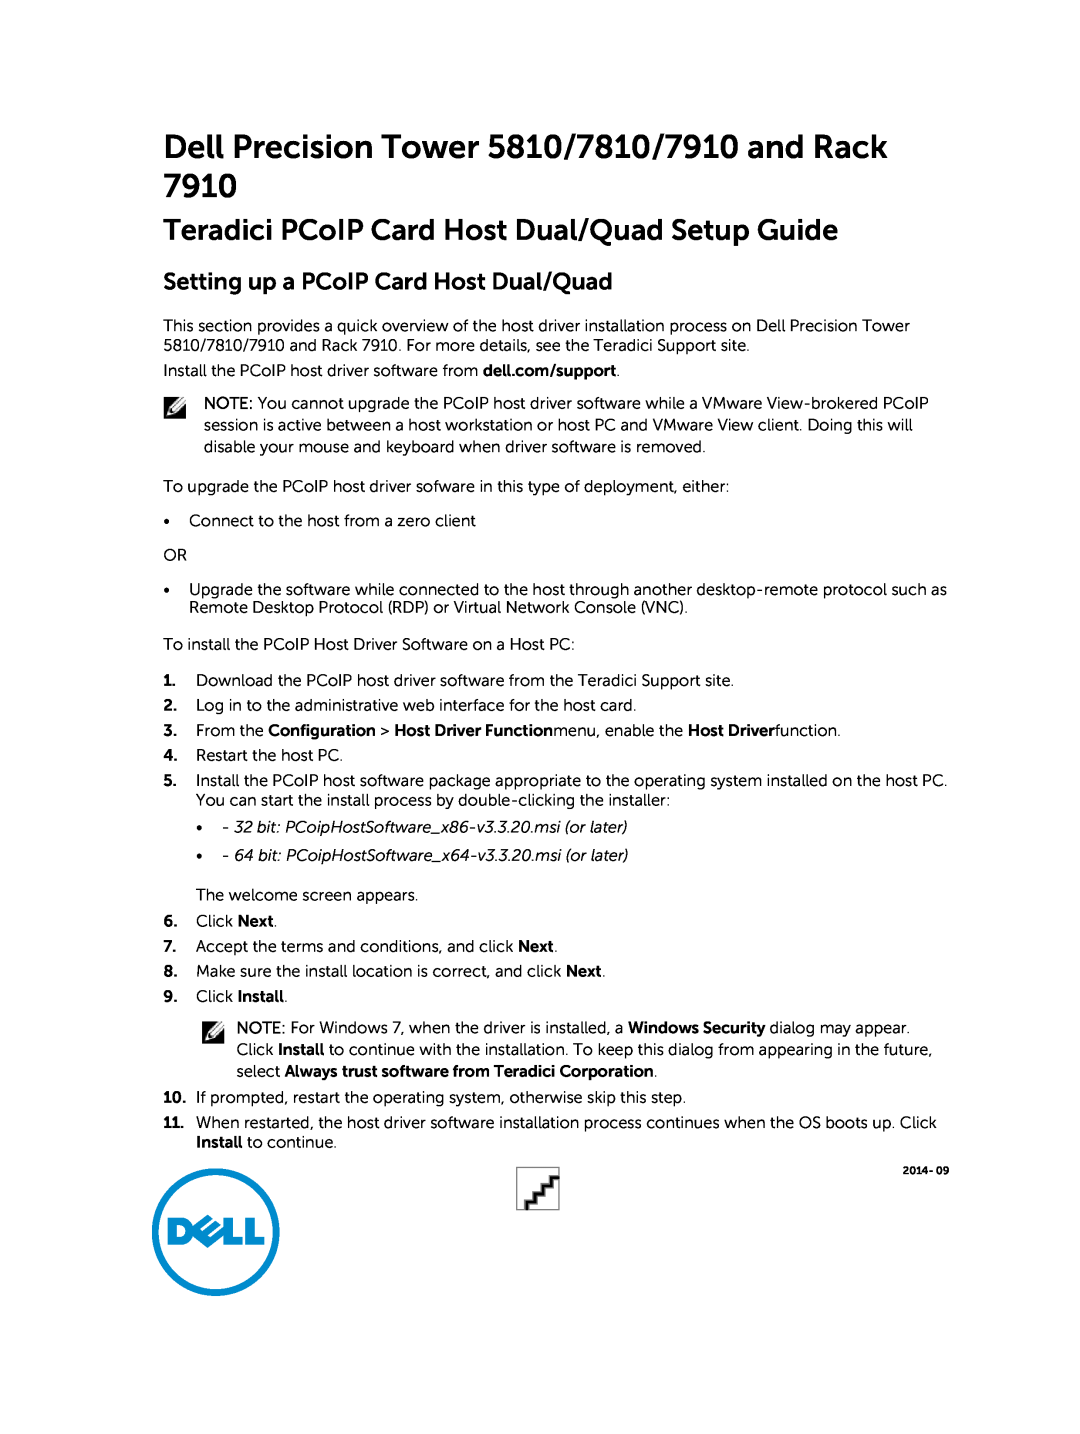 Dell setup guide Thunderbolt Add-In-Cards Setup Guide, Dell Precision Tower 5810/7810/7910 and Rack 